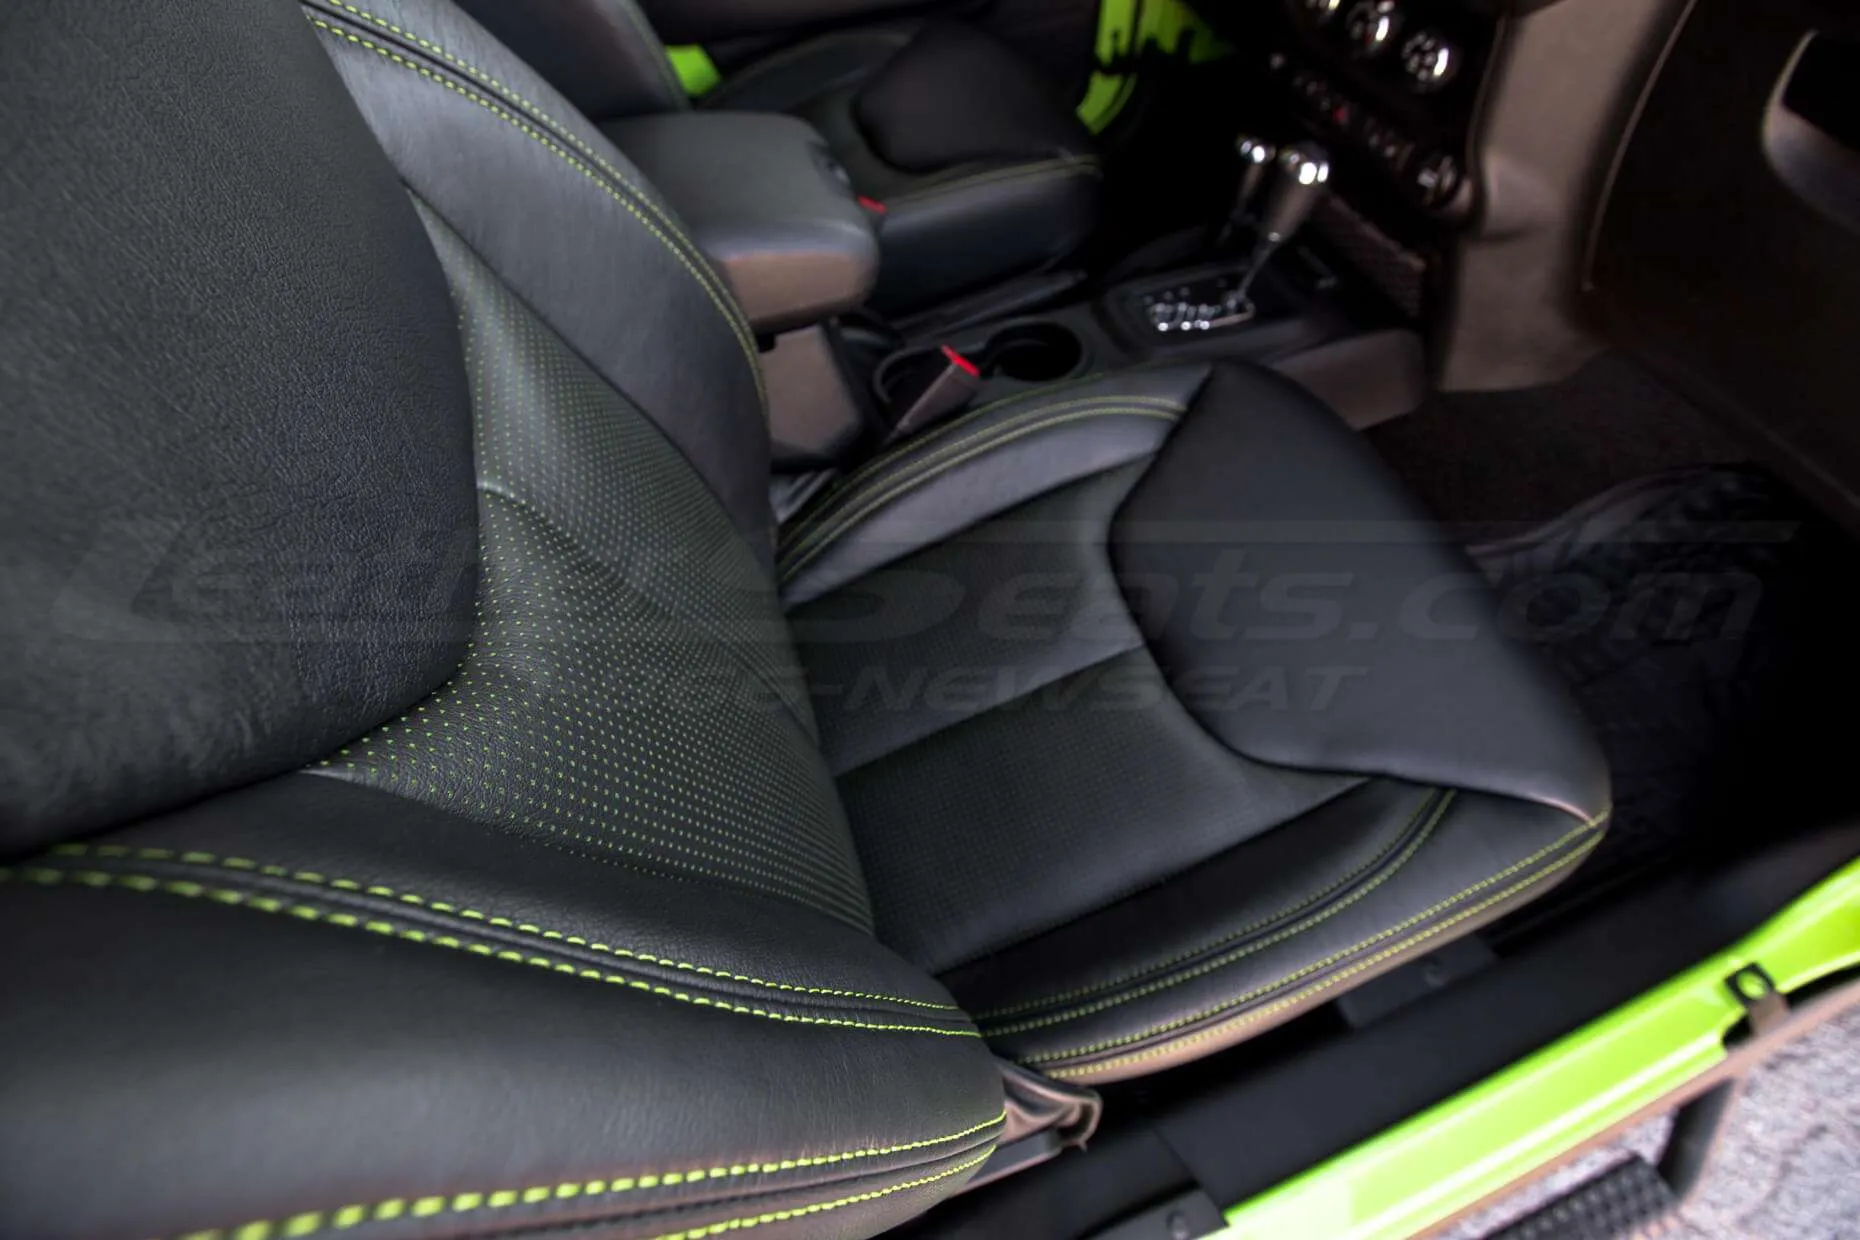 Jeep Wrangler Installed Leather Seats - Black & Piazza Green - Front passenger seat - top-down view